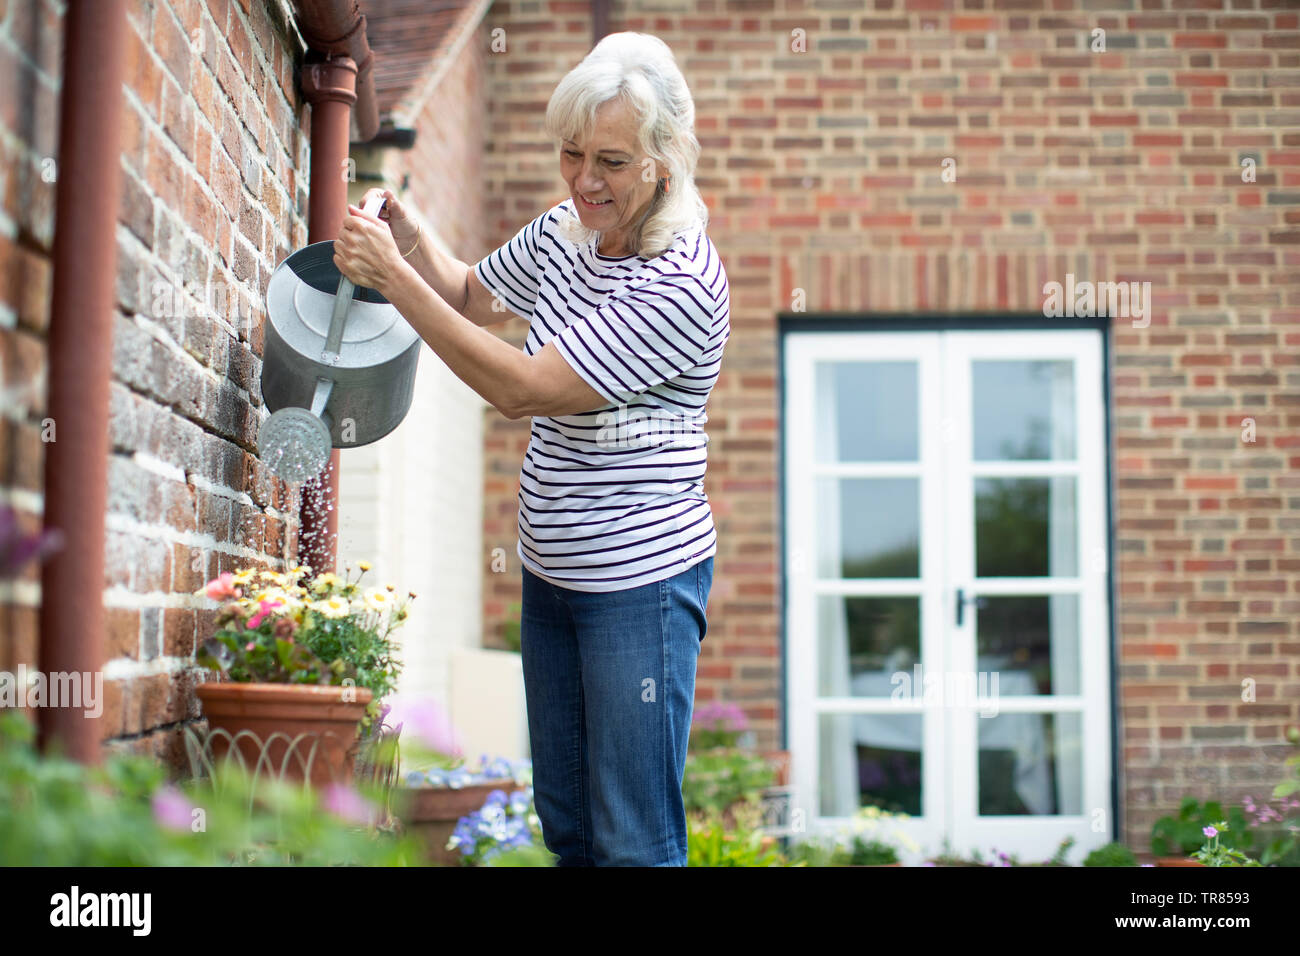 Senior Woman Watering Plants With Watering Can In Garden At Home Stock Photo